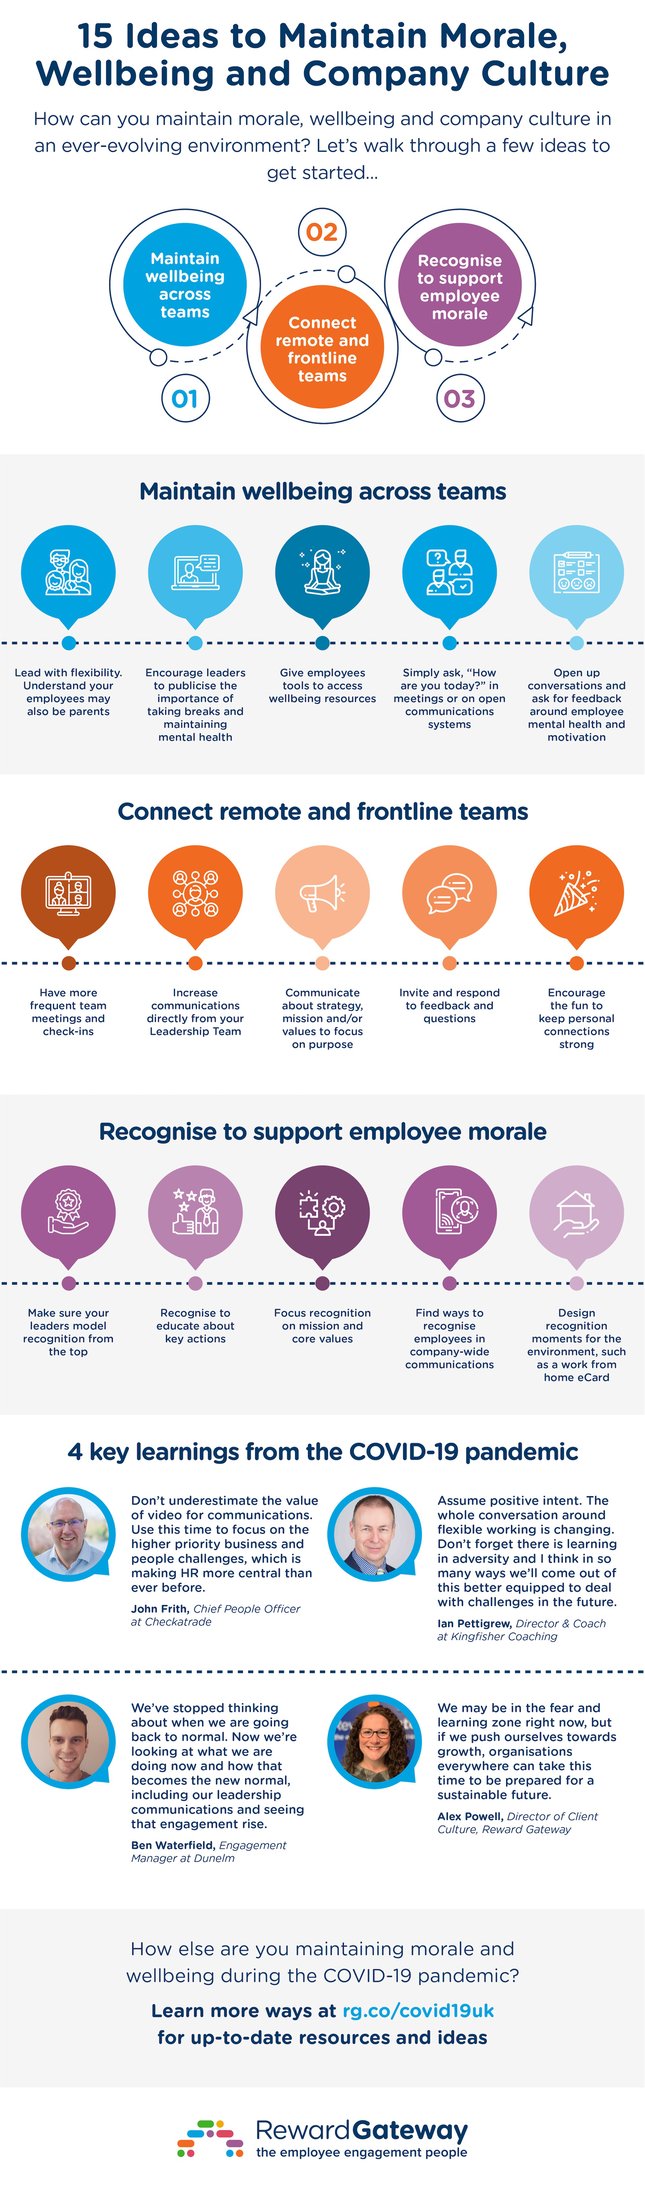 uk-infographic-15-ideas-maintain-morale-wellbeing-company-culture